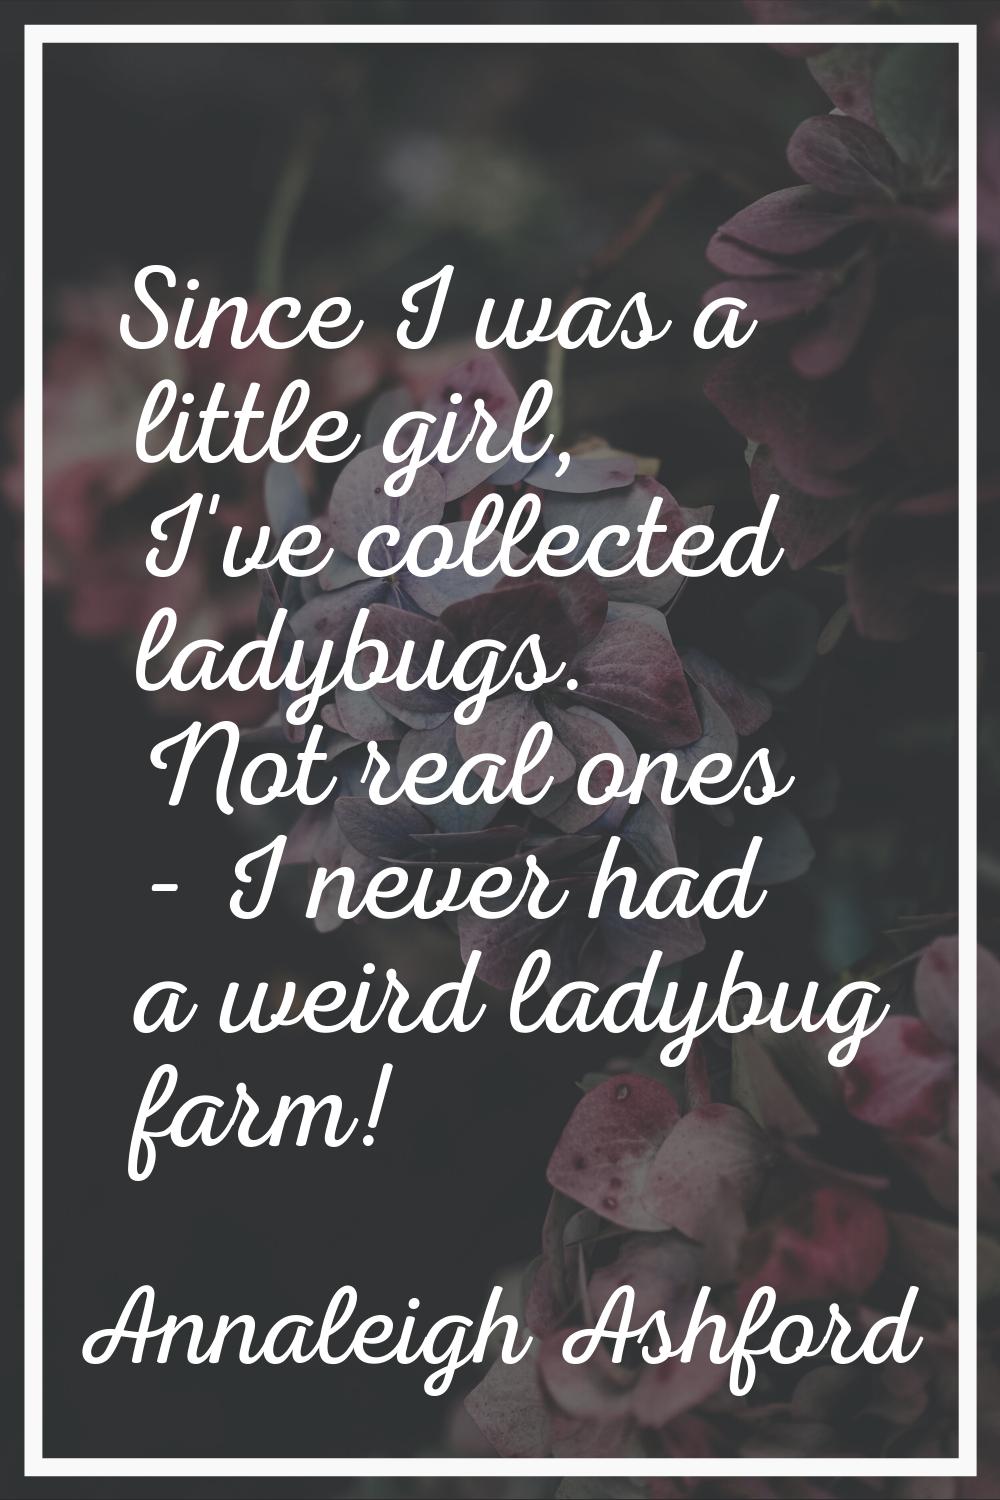 Since I was a little girl, I've collected ladybugs. Not real ones - I never had a weird ladybug far